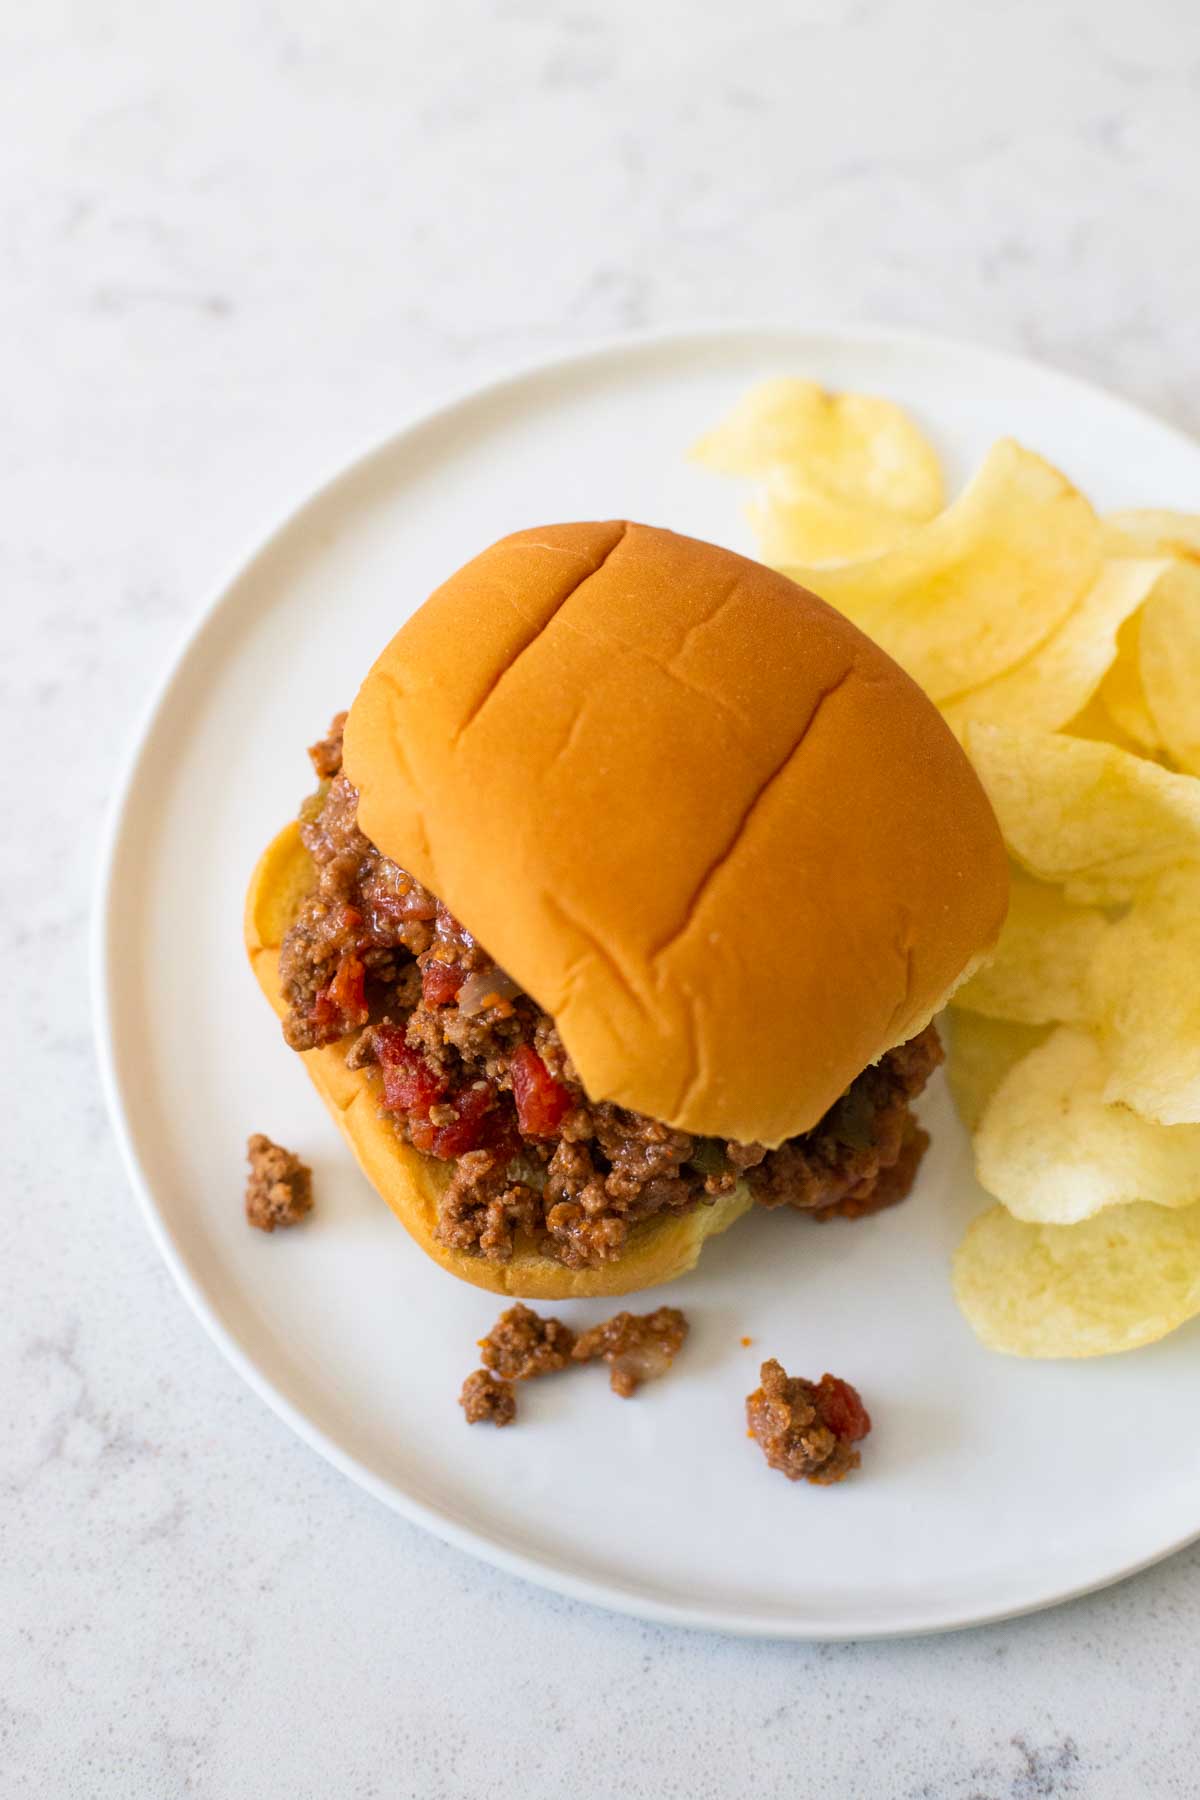 A sloppy joe sandwich with filling falling onto the plate has a pile of potato chips next to it.